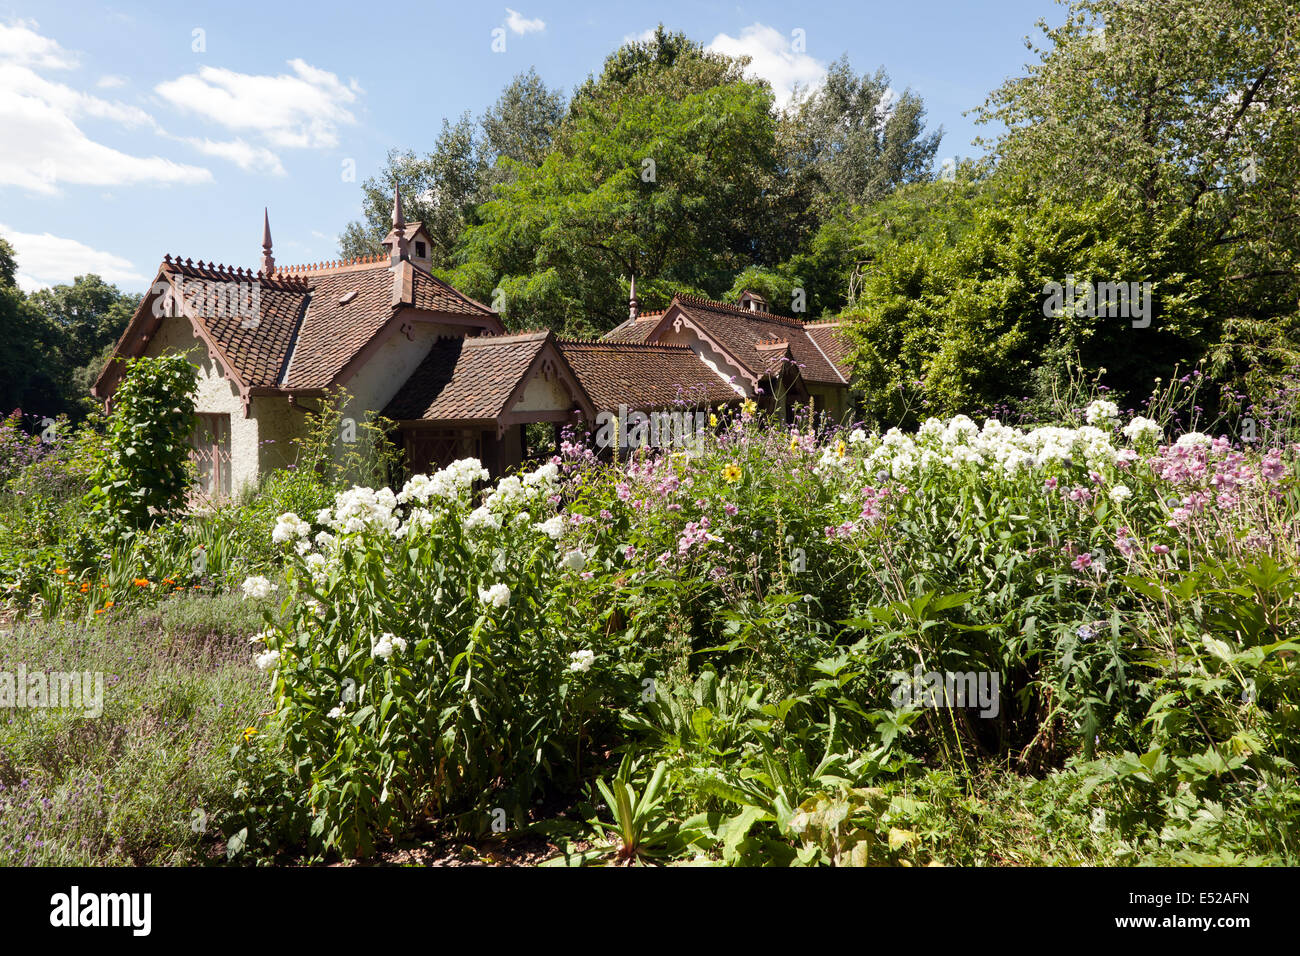 A view of Duck Island Cottage and Garden, St James's Park, London. Stock Photo